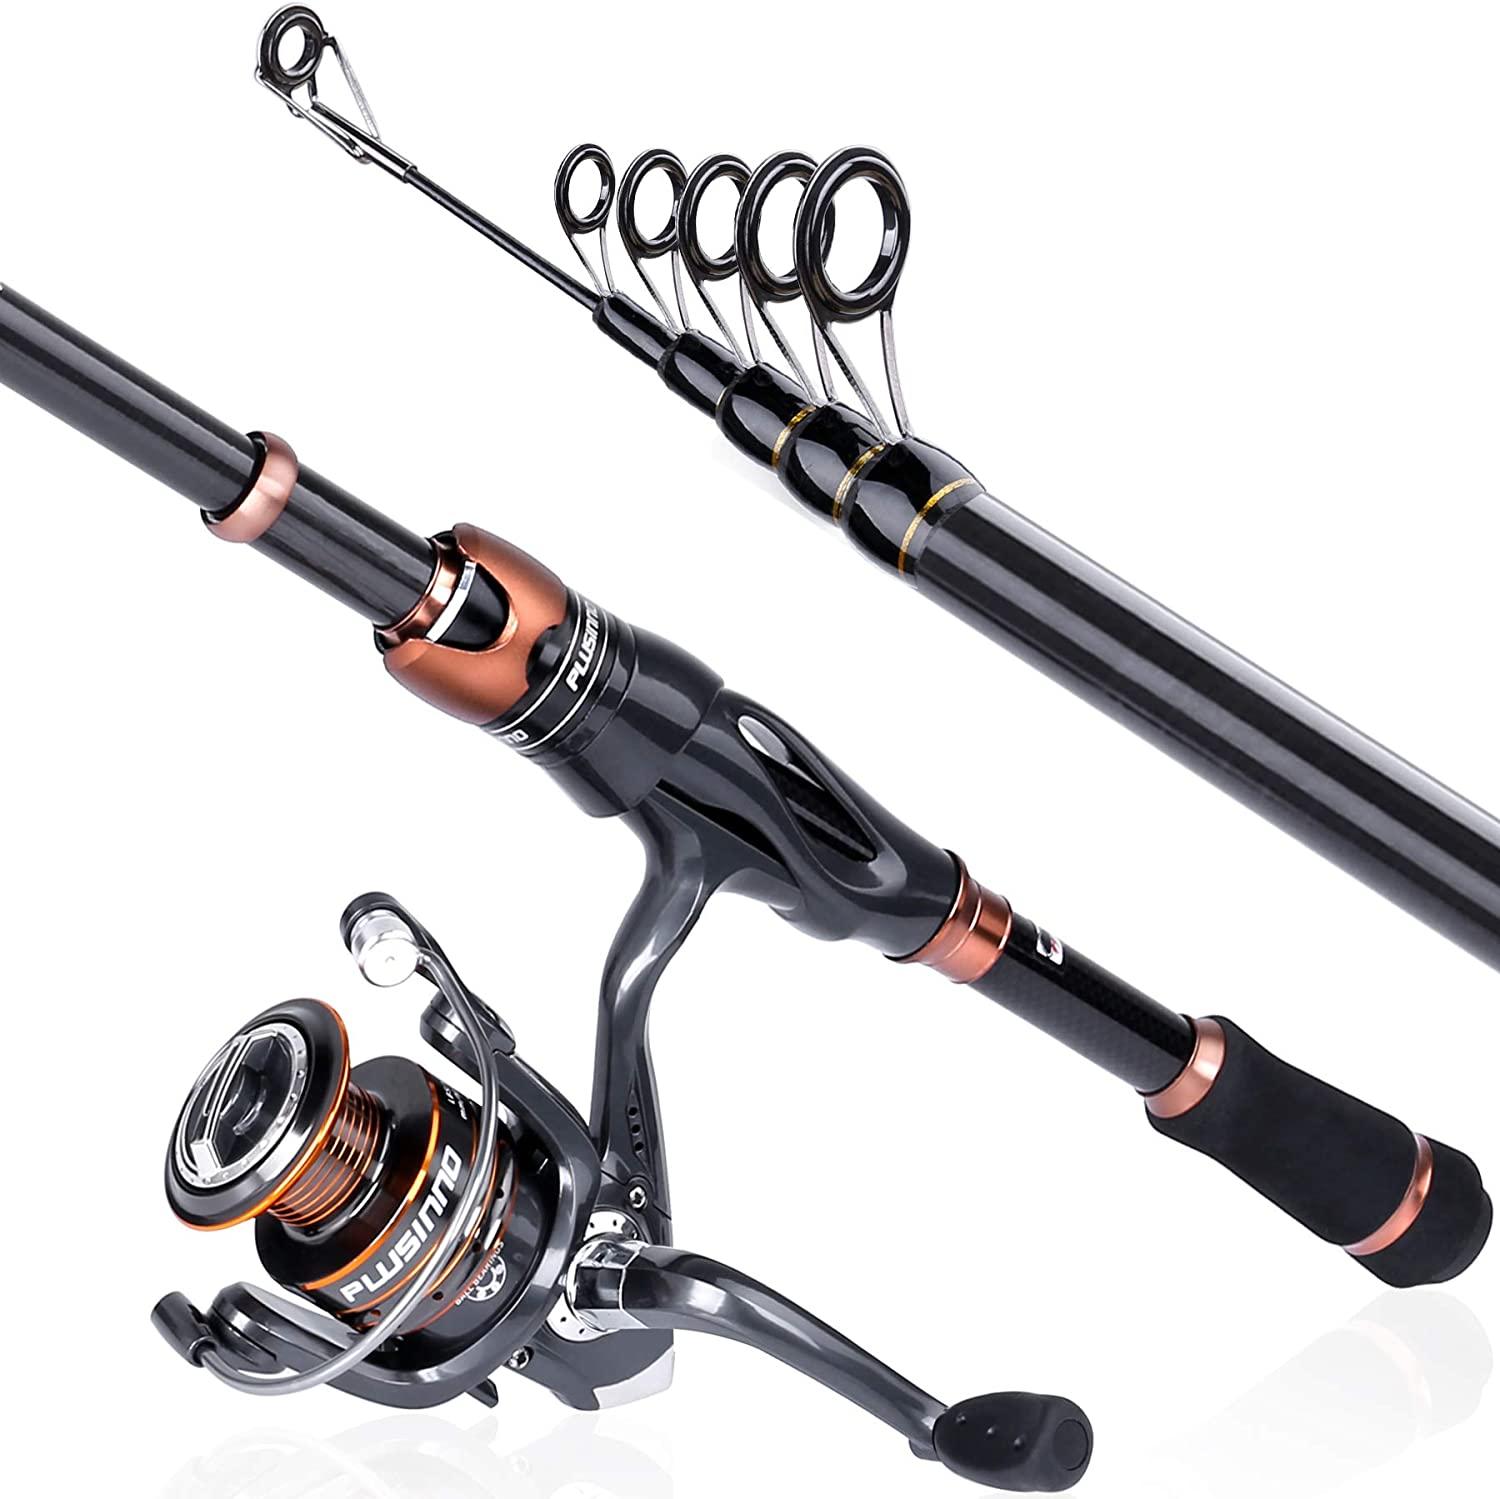  PLUSINNO Fishing Rod and Reel Combos Carbon Fiber Telescopic  Fishing Pole with Spinning Reels Sea Saltwater Freshwater Kit Fishing Rod  Kit : Sports & Outdoors